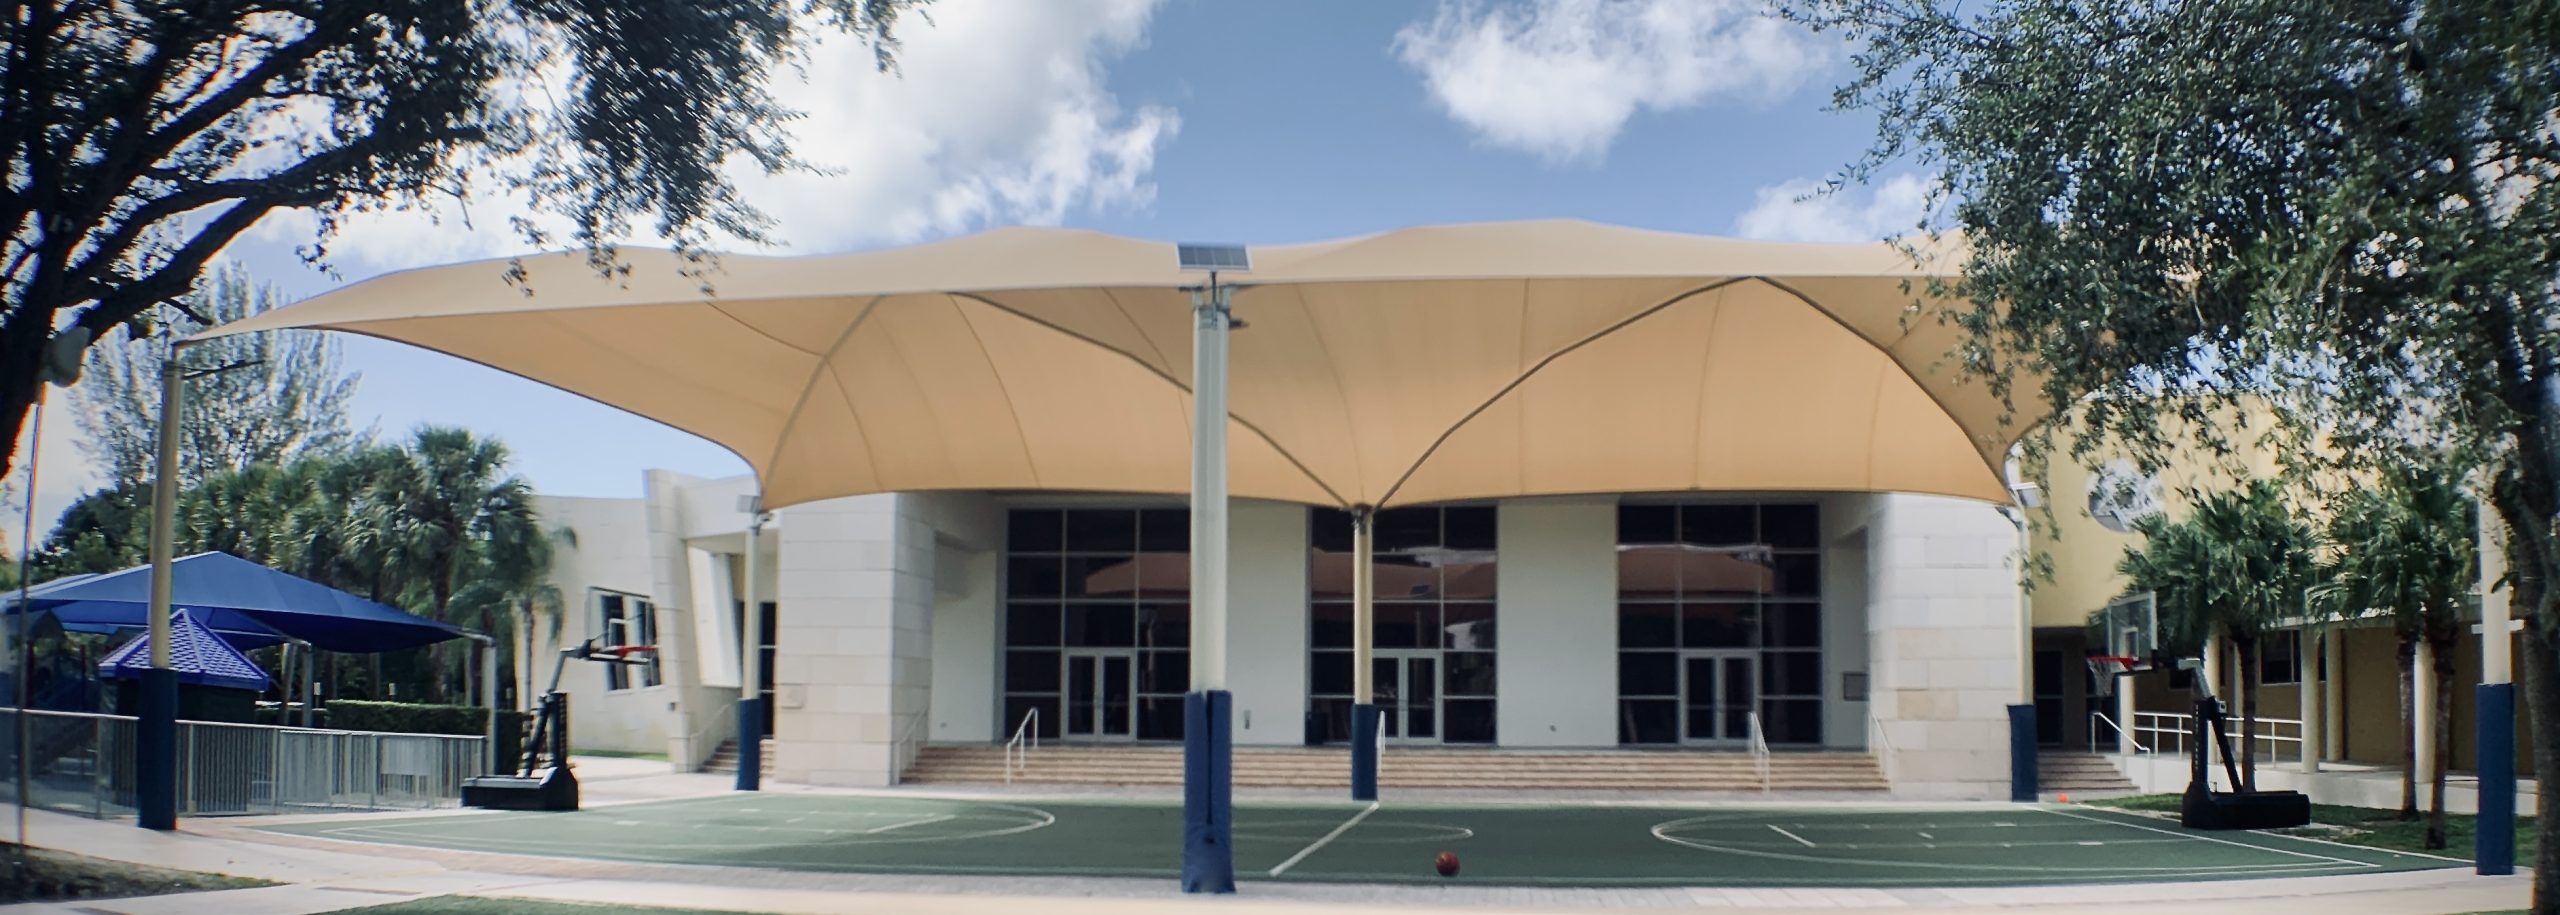 Shade Structure over an outdoor basketball court